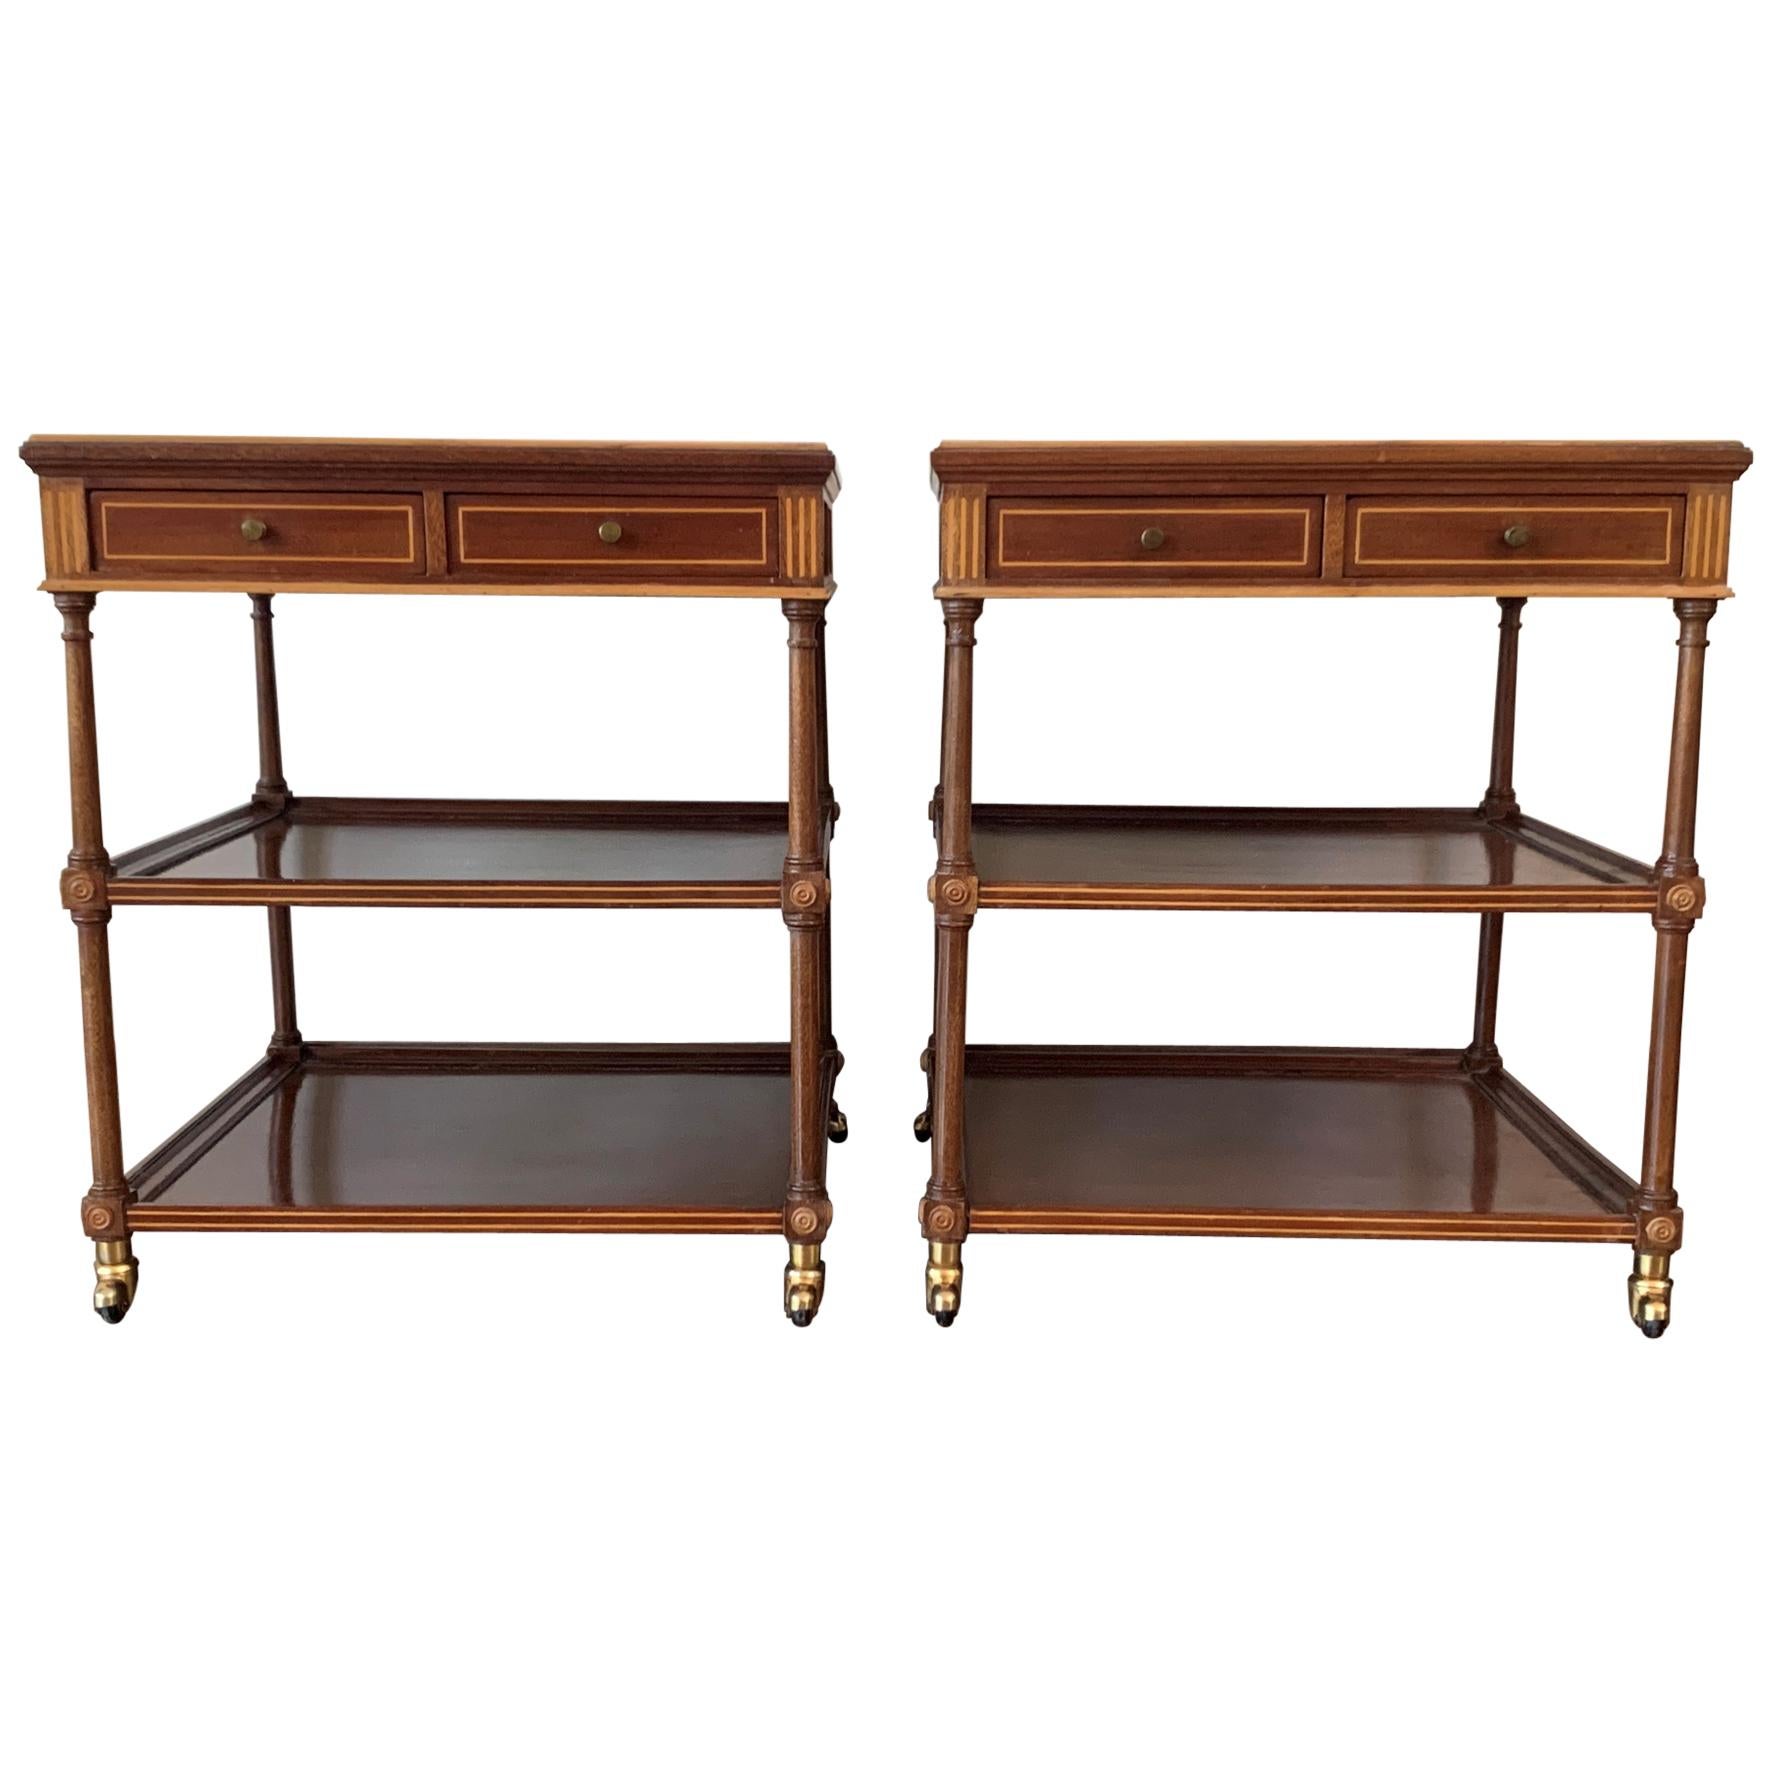 20th Pair of Side or Nightstands Tables on Wheels with Two Drawers & Two Shelves